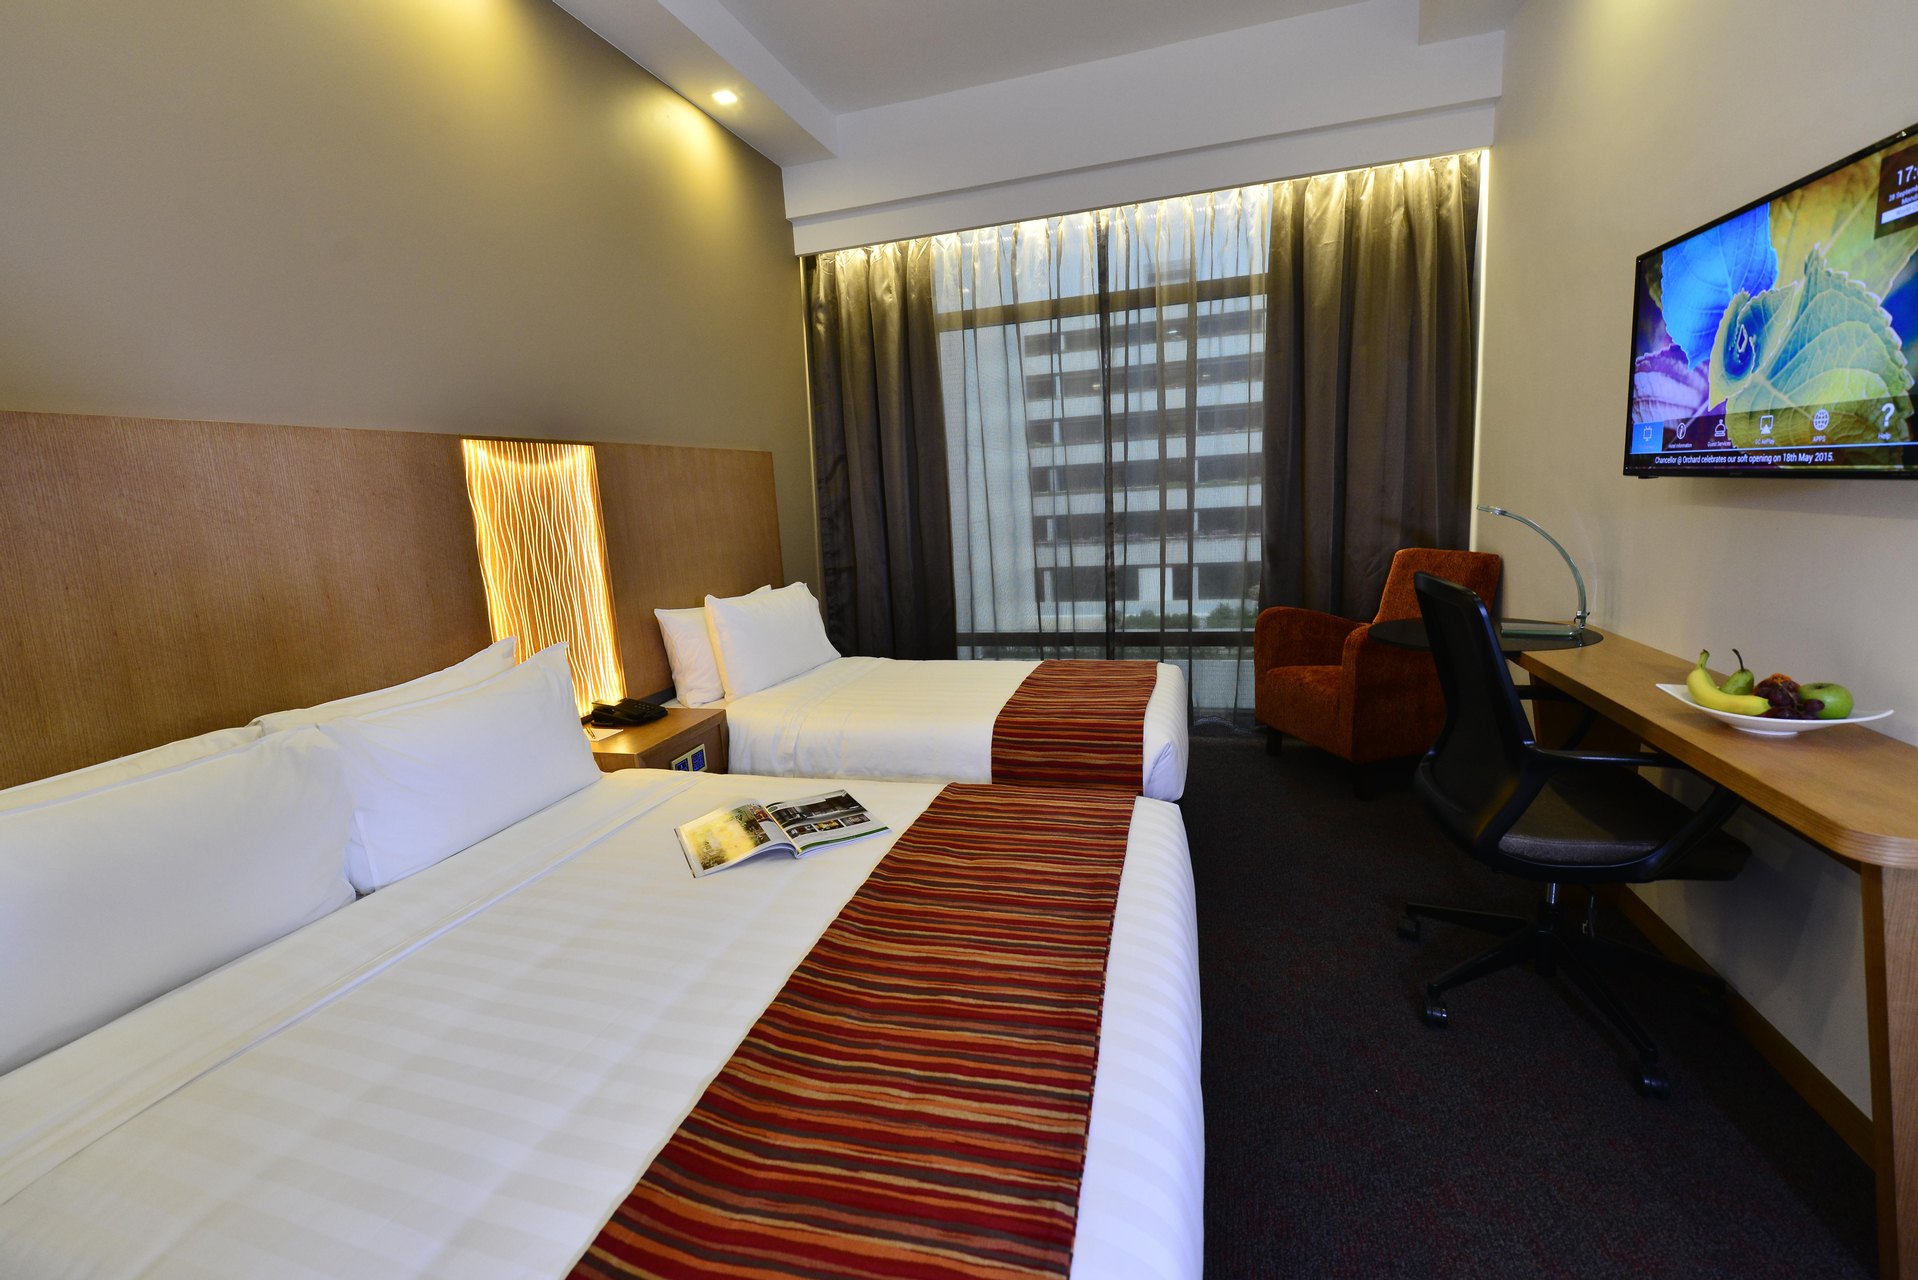 Bedroom 3, Hotel Grand Central (SG Clean, Staycation Approved), Singapura